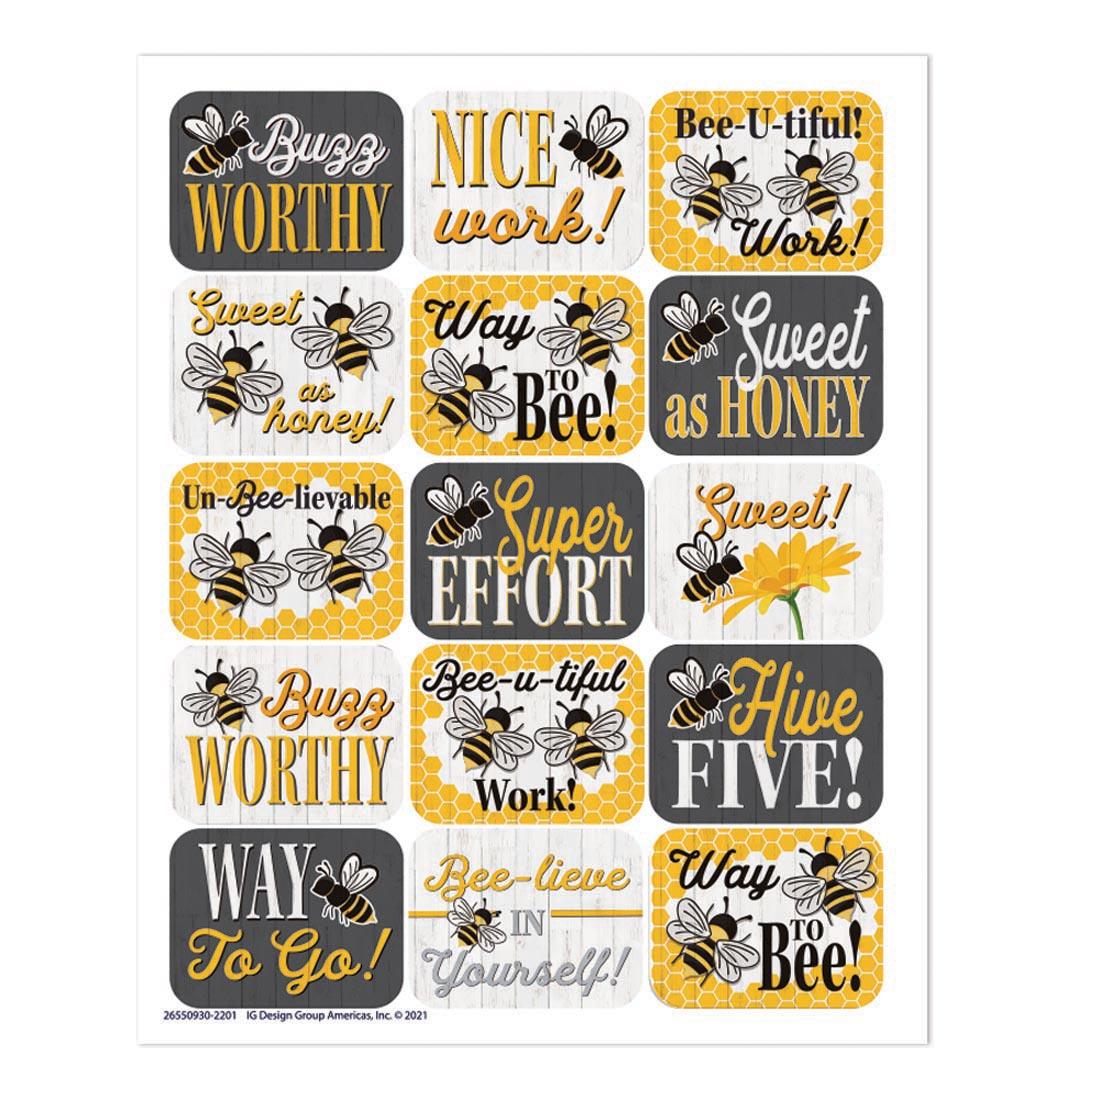 Success Stickers from The Hive collection by Eureka with sayings like Buzz Worthy, Bee-U-tiful Work!, Sweet as honey!